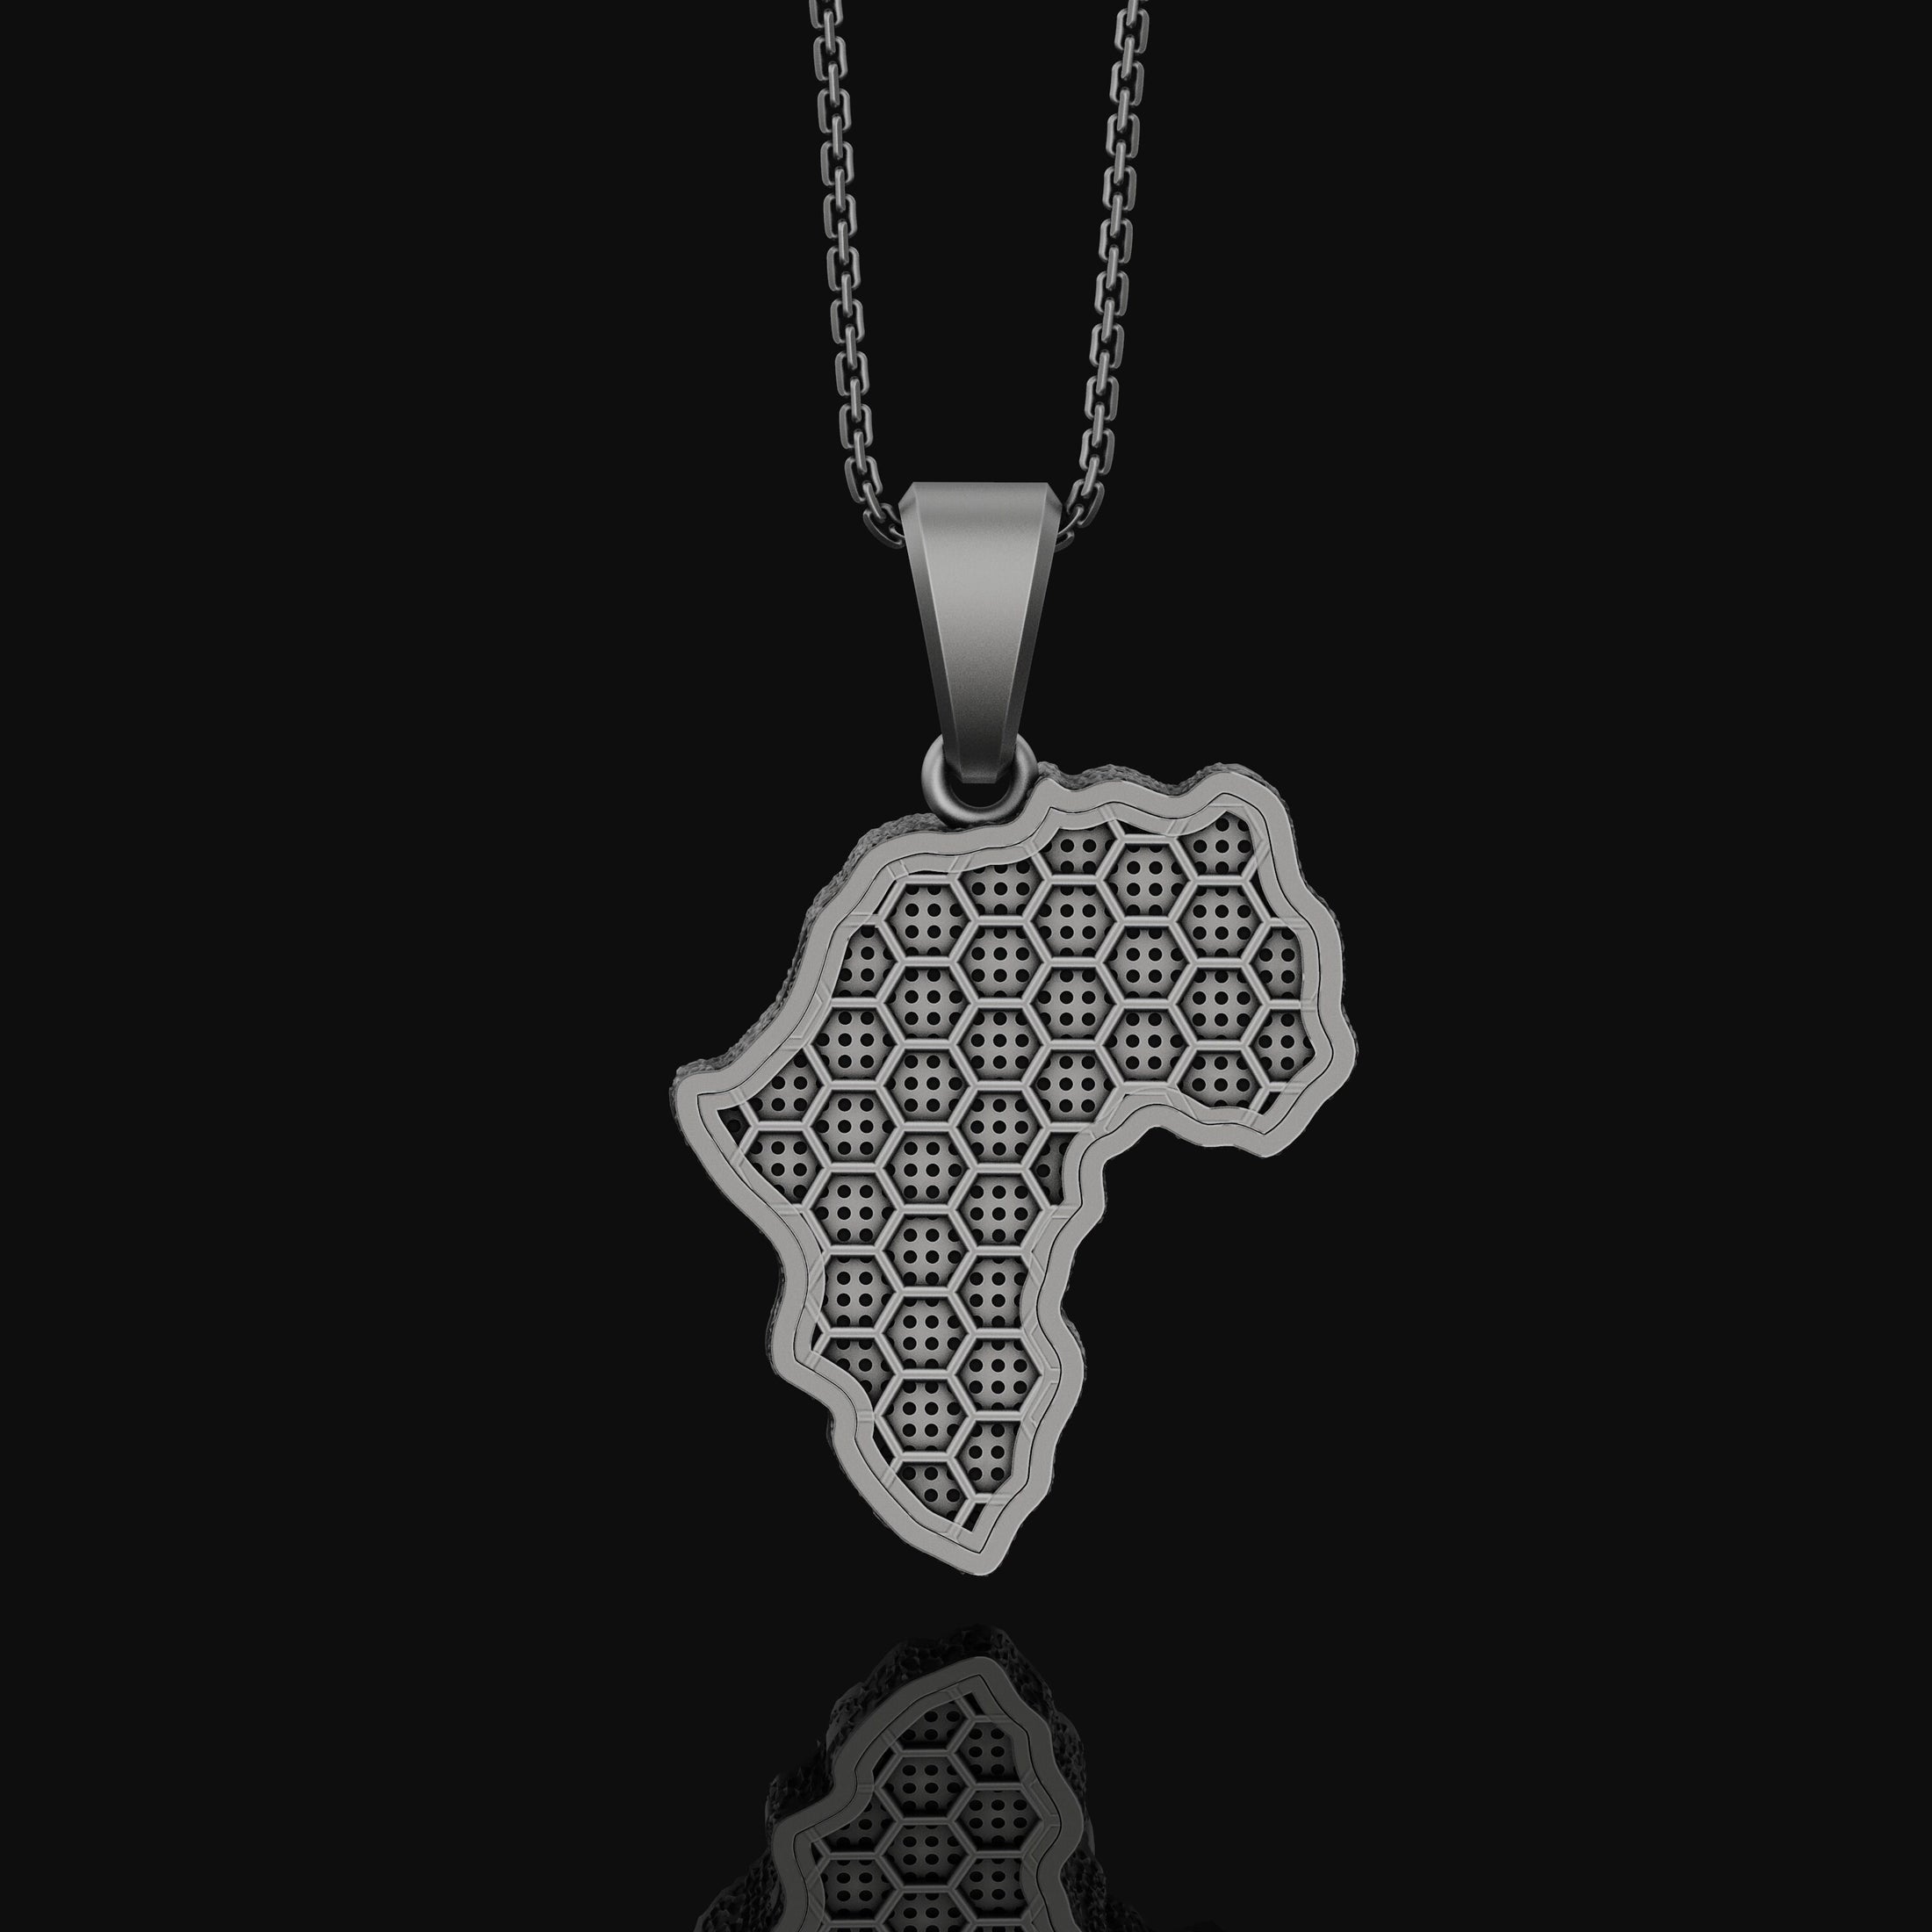 Silver Africa Continent Shaped Lion Head Necklace - Majestic Safari Style Pendant, Elegant Wildlife African Pride Jewelry